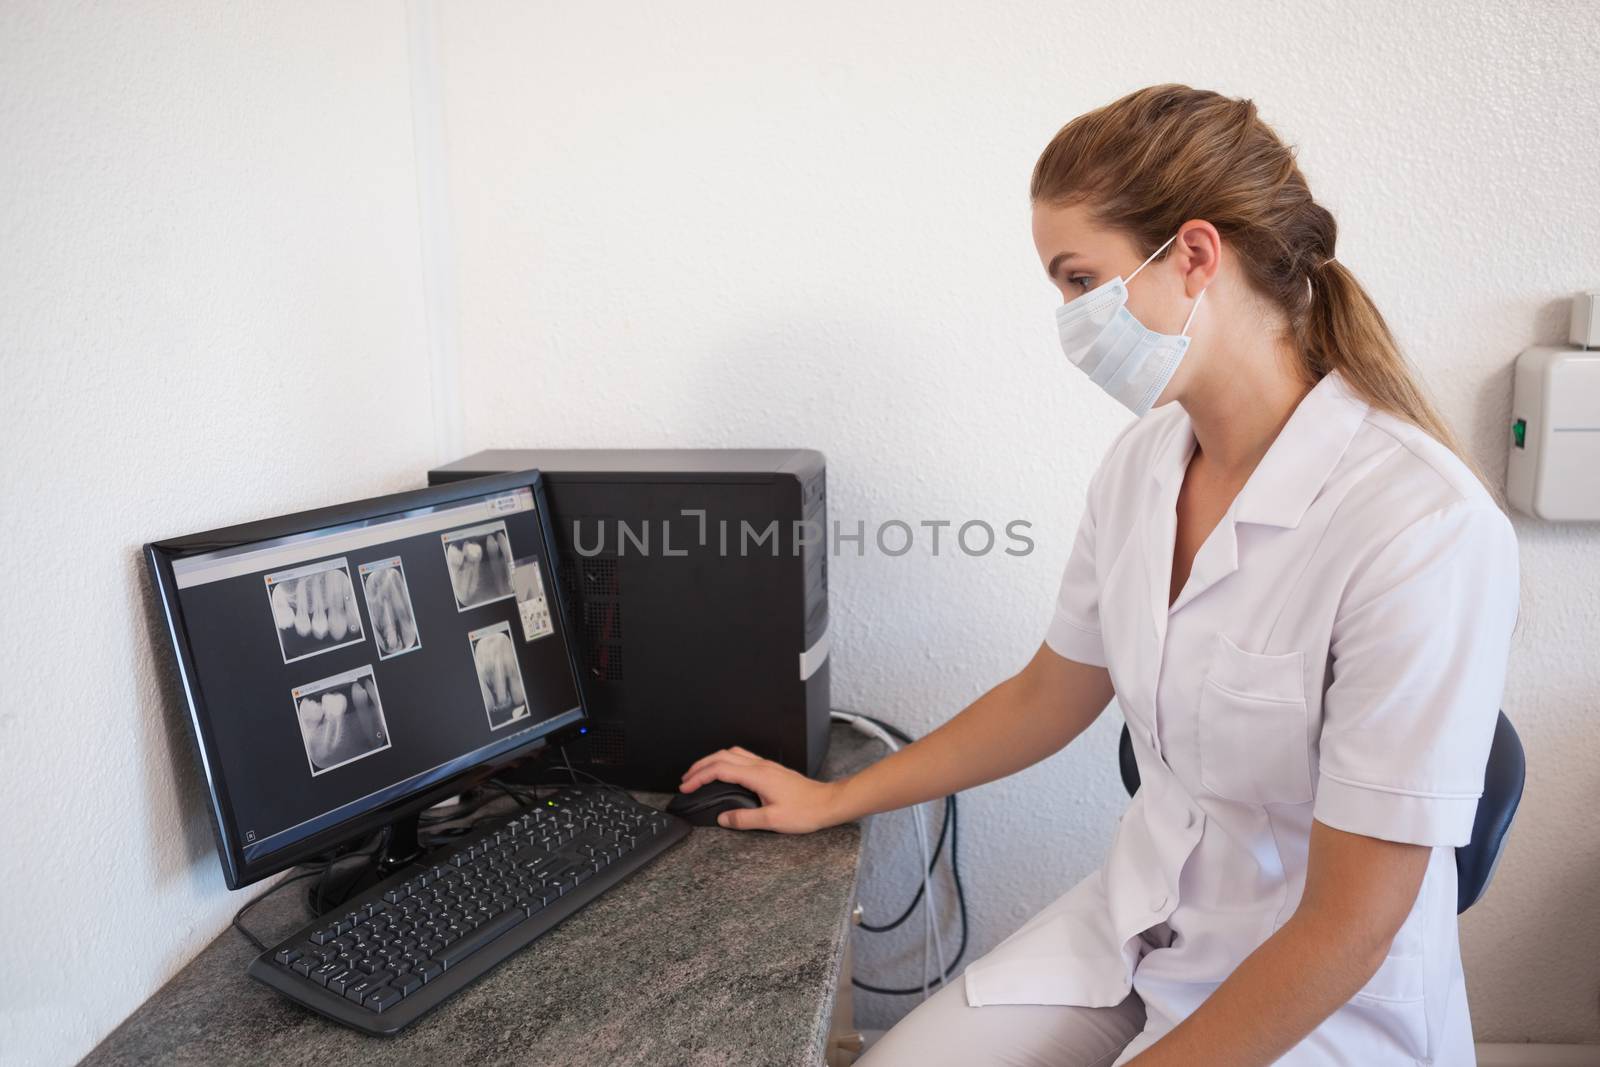 Dental assistant looking at x-rays on computer by Wavebreakmedia